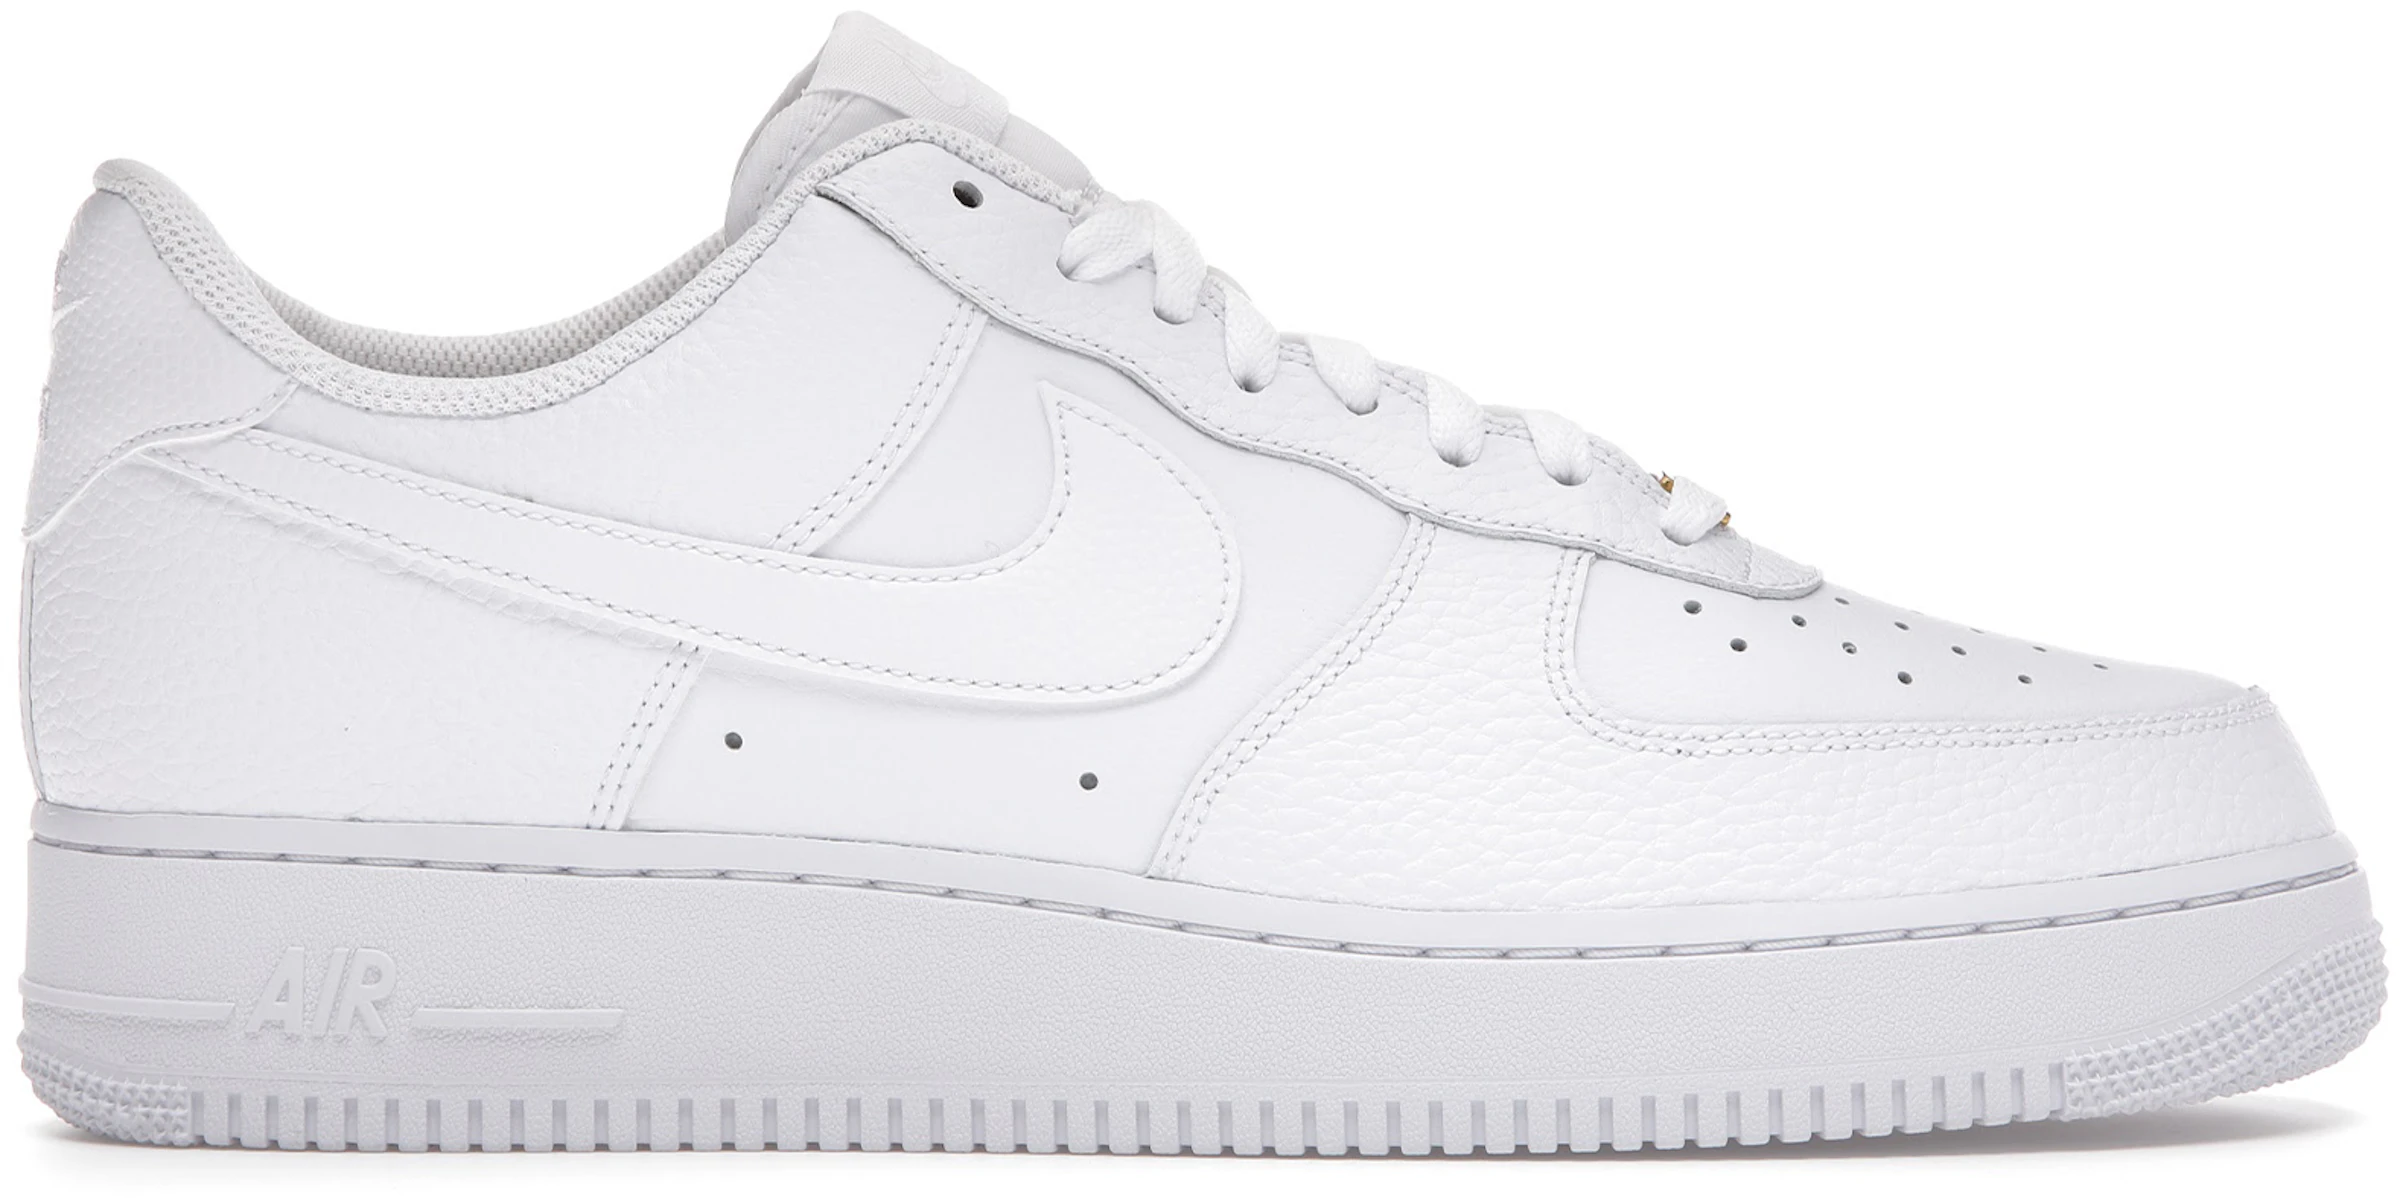 Nike Air Force 1 Low Triple White Tumbled Leather - CZ0326-101 - IT